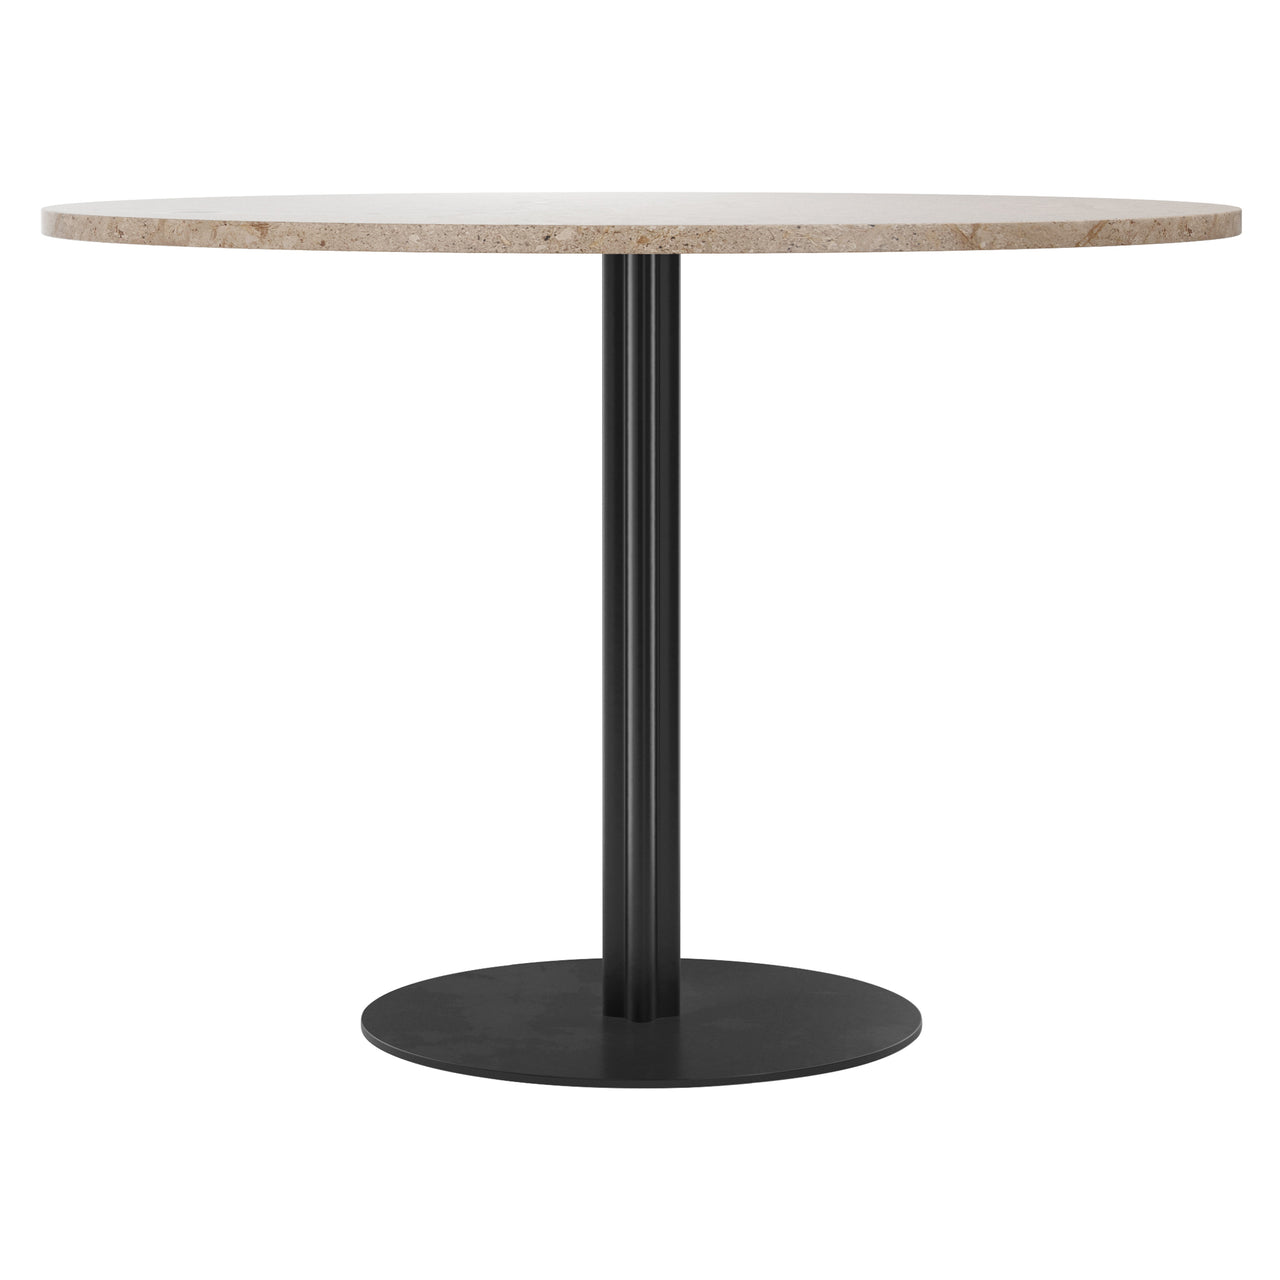 Harbour Column Round Dining Table: Large - 41.3